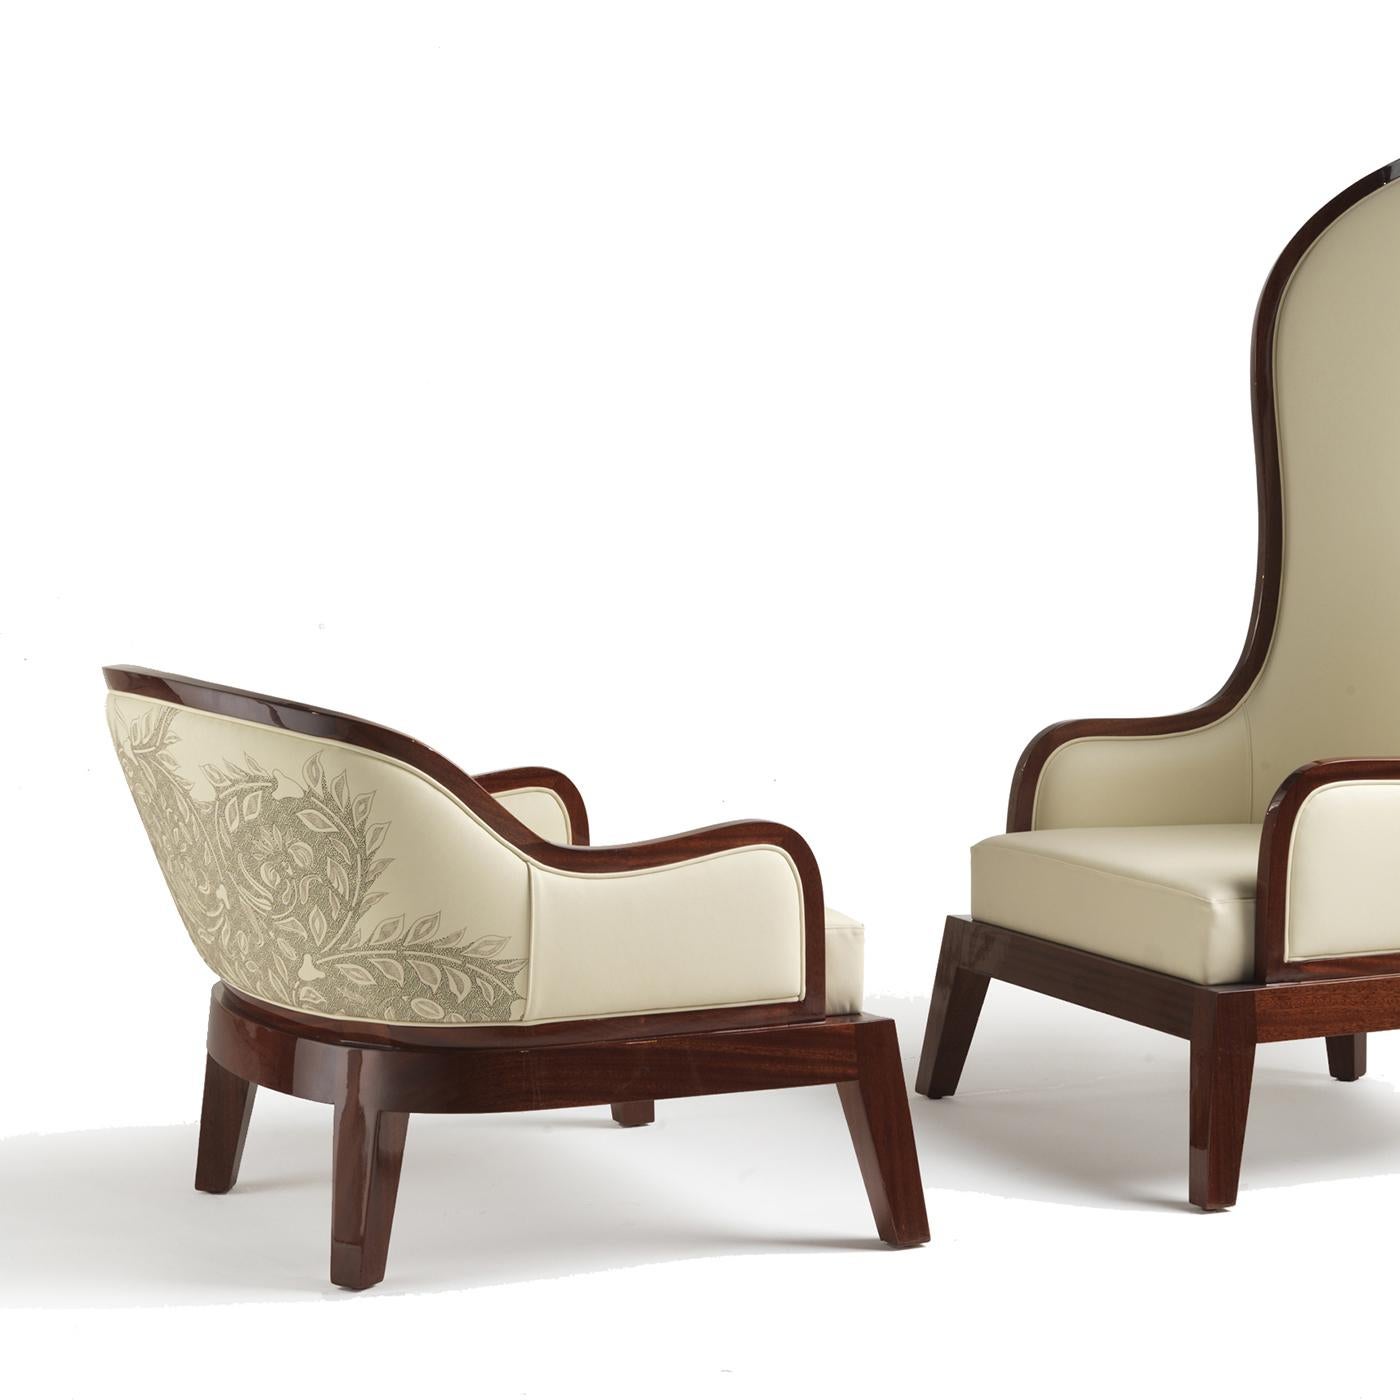 An ideal piece to lounge with a good book or enjoy the company of friends and family after dinner, this armchair features a stunning combination of comfort and elegant design. The structure in wood is finished in a rich mahogany shade that contrasts